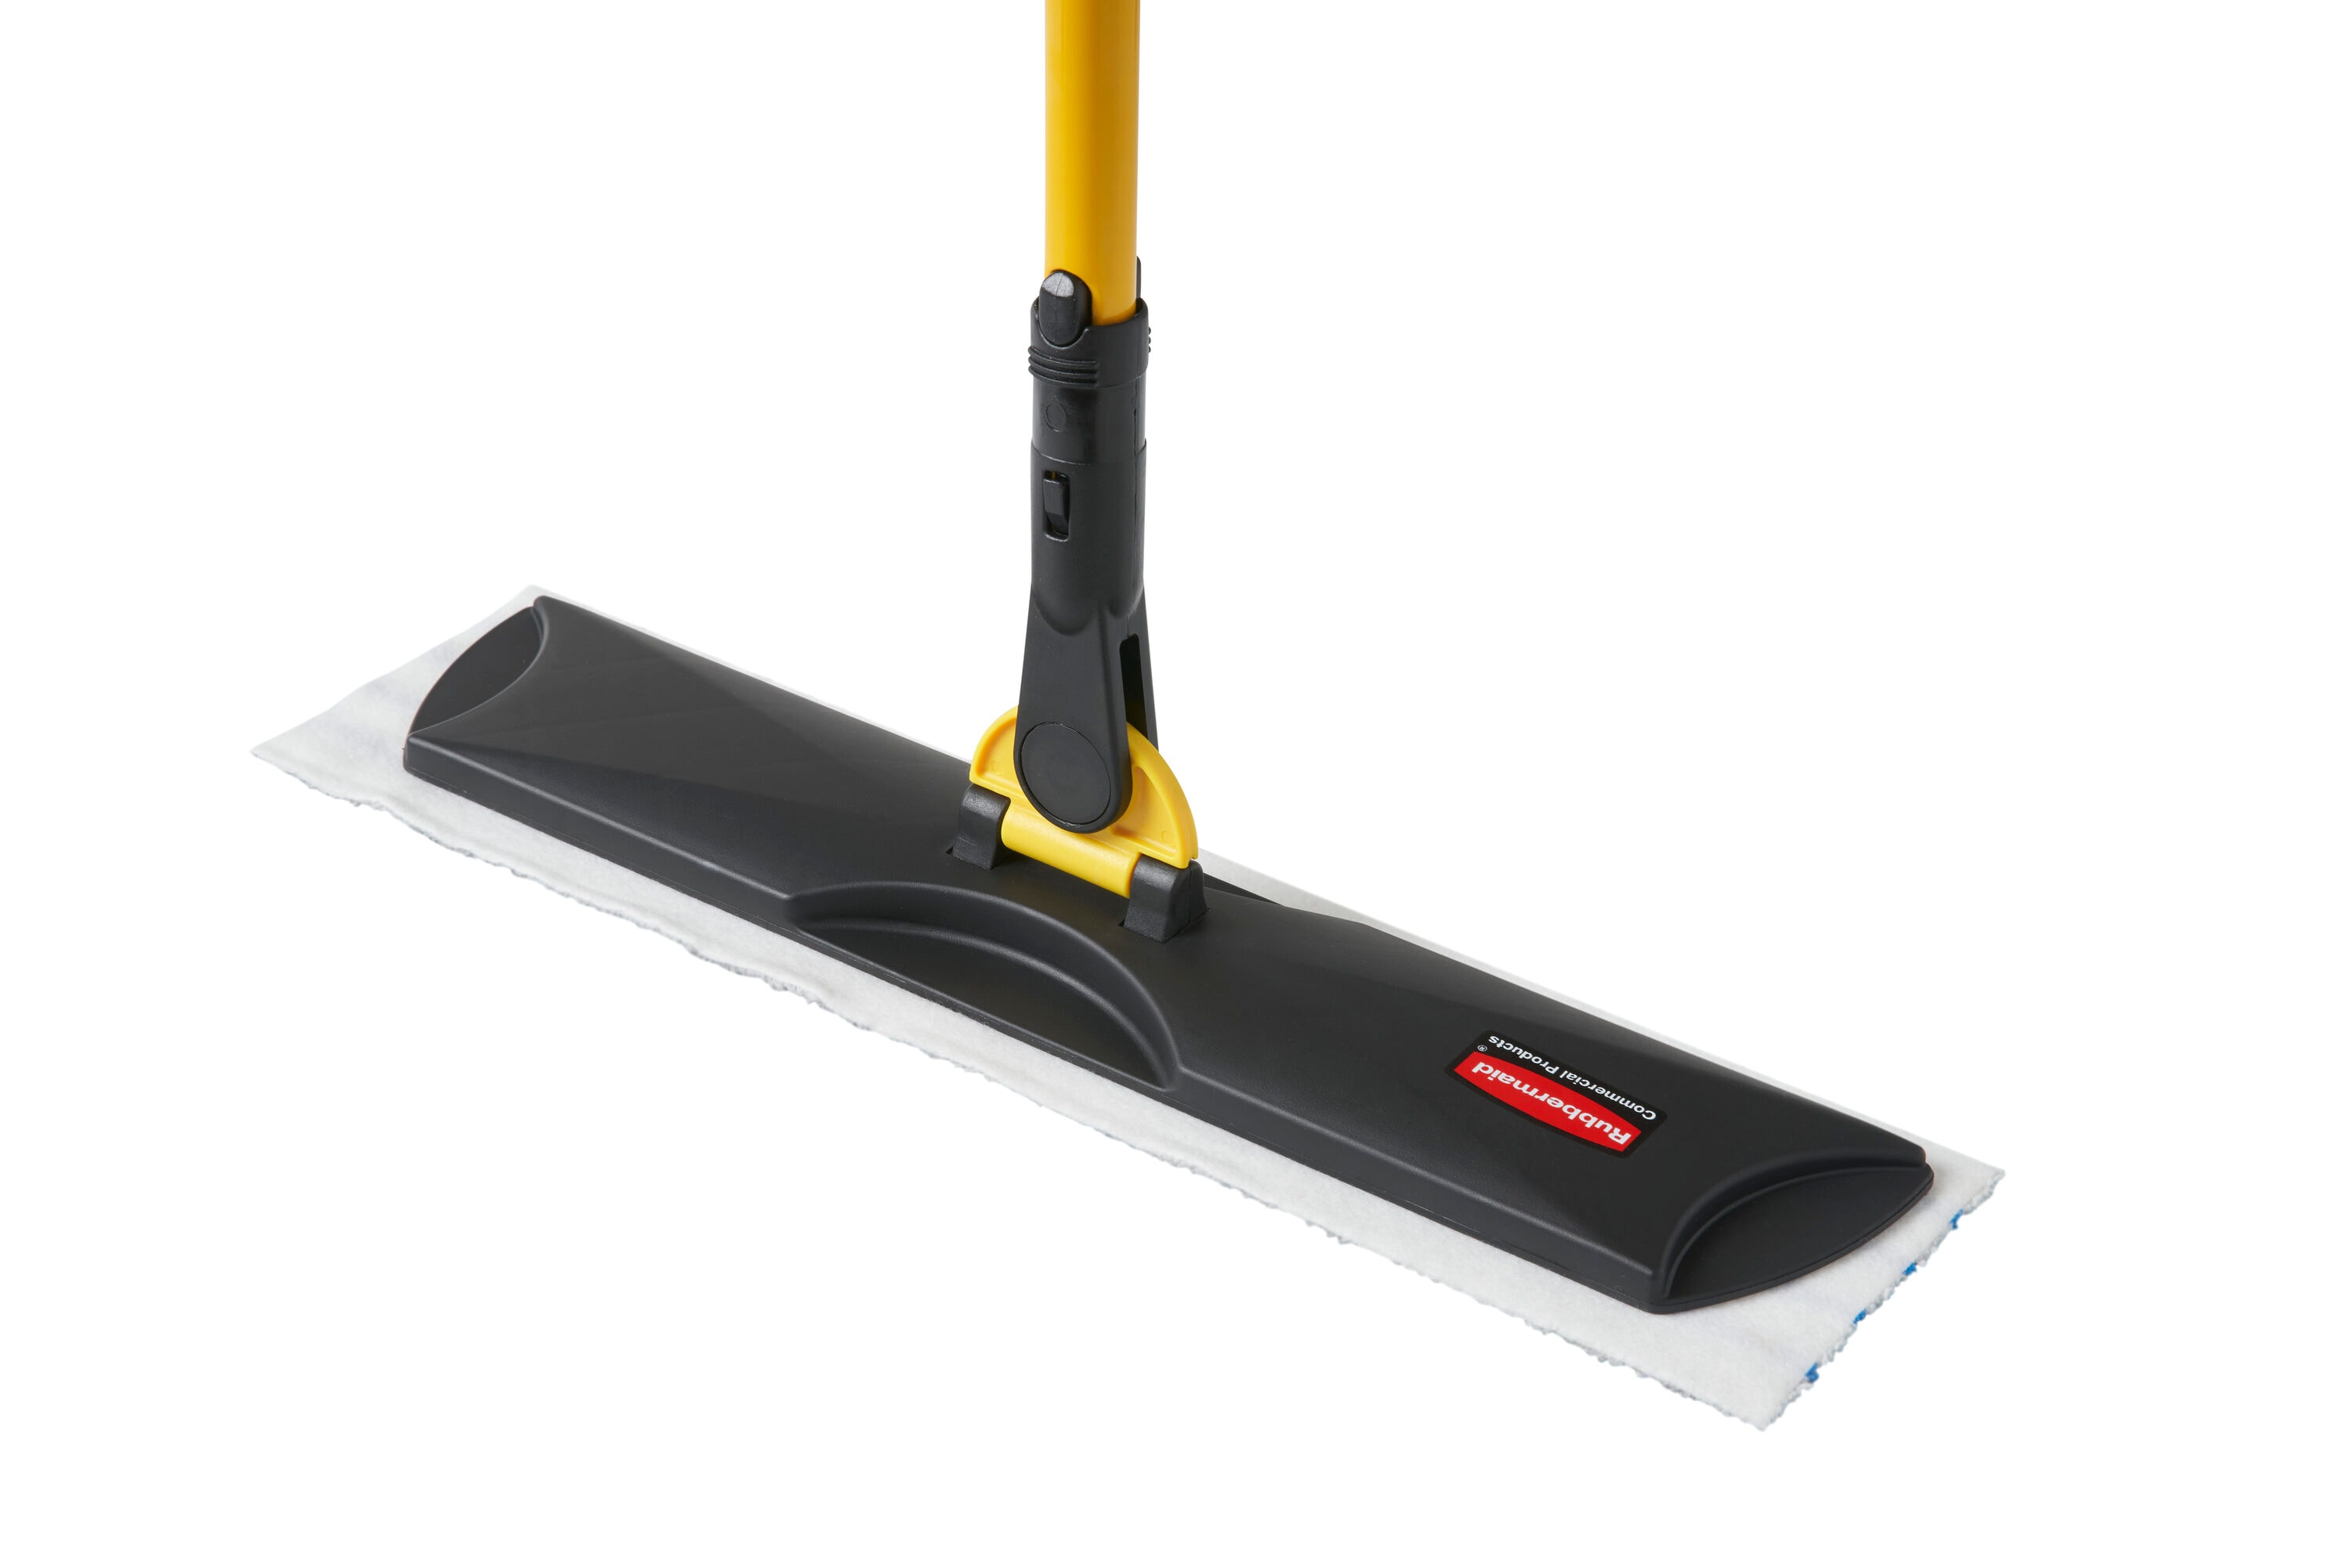 Rubbermaid Commercial Adaptable Flat Mop Kit